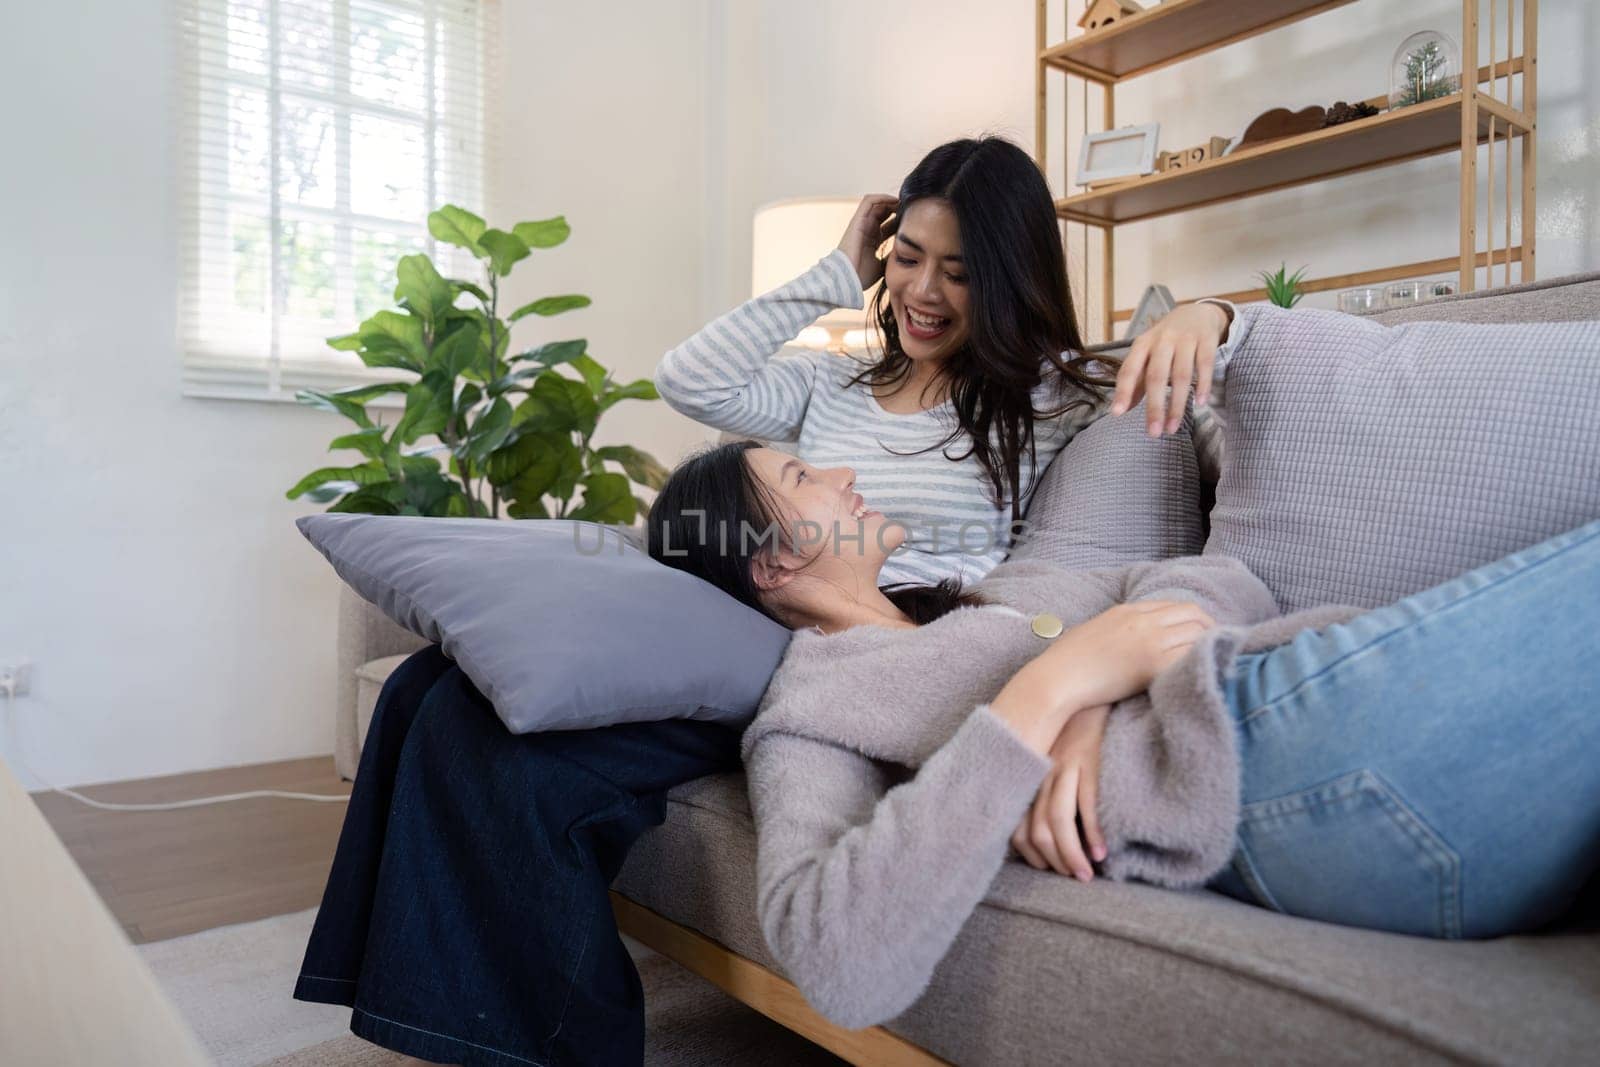 Asian lesbian couple relaxing on sofa at home. Concept of love and companionship.